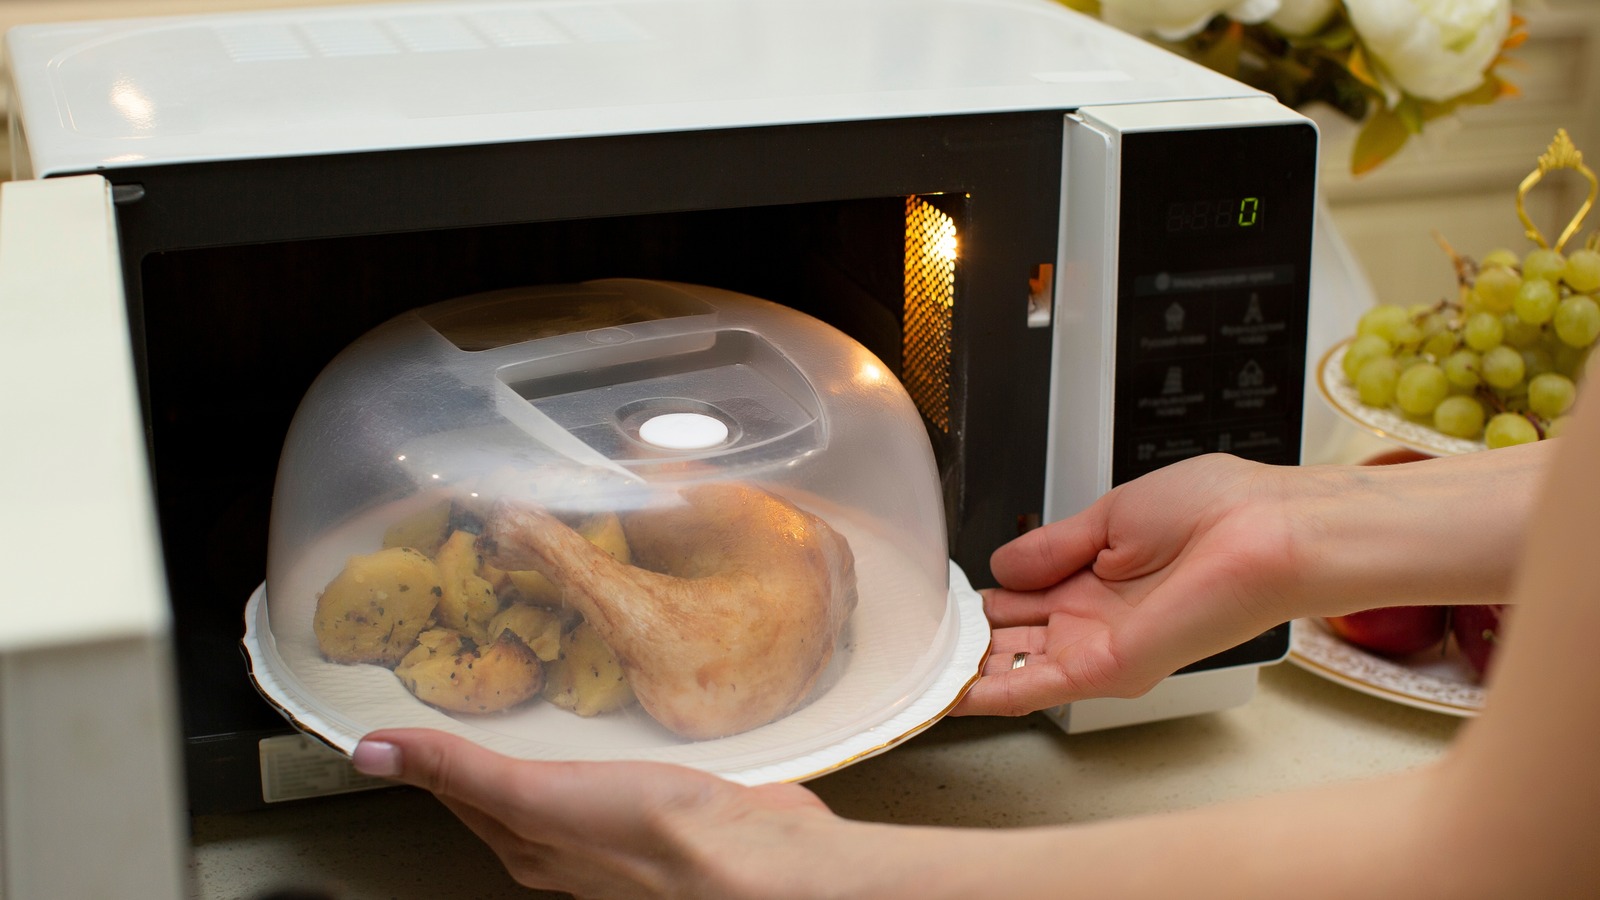 https://www.tastingtable.com/img/gallery/why-you-should-always-cover-food-in-the-microwave/l-intro-1660852062.jpg